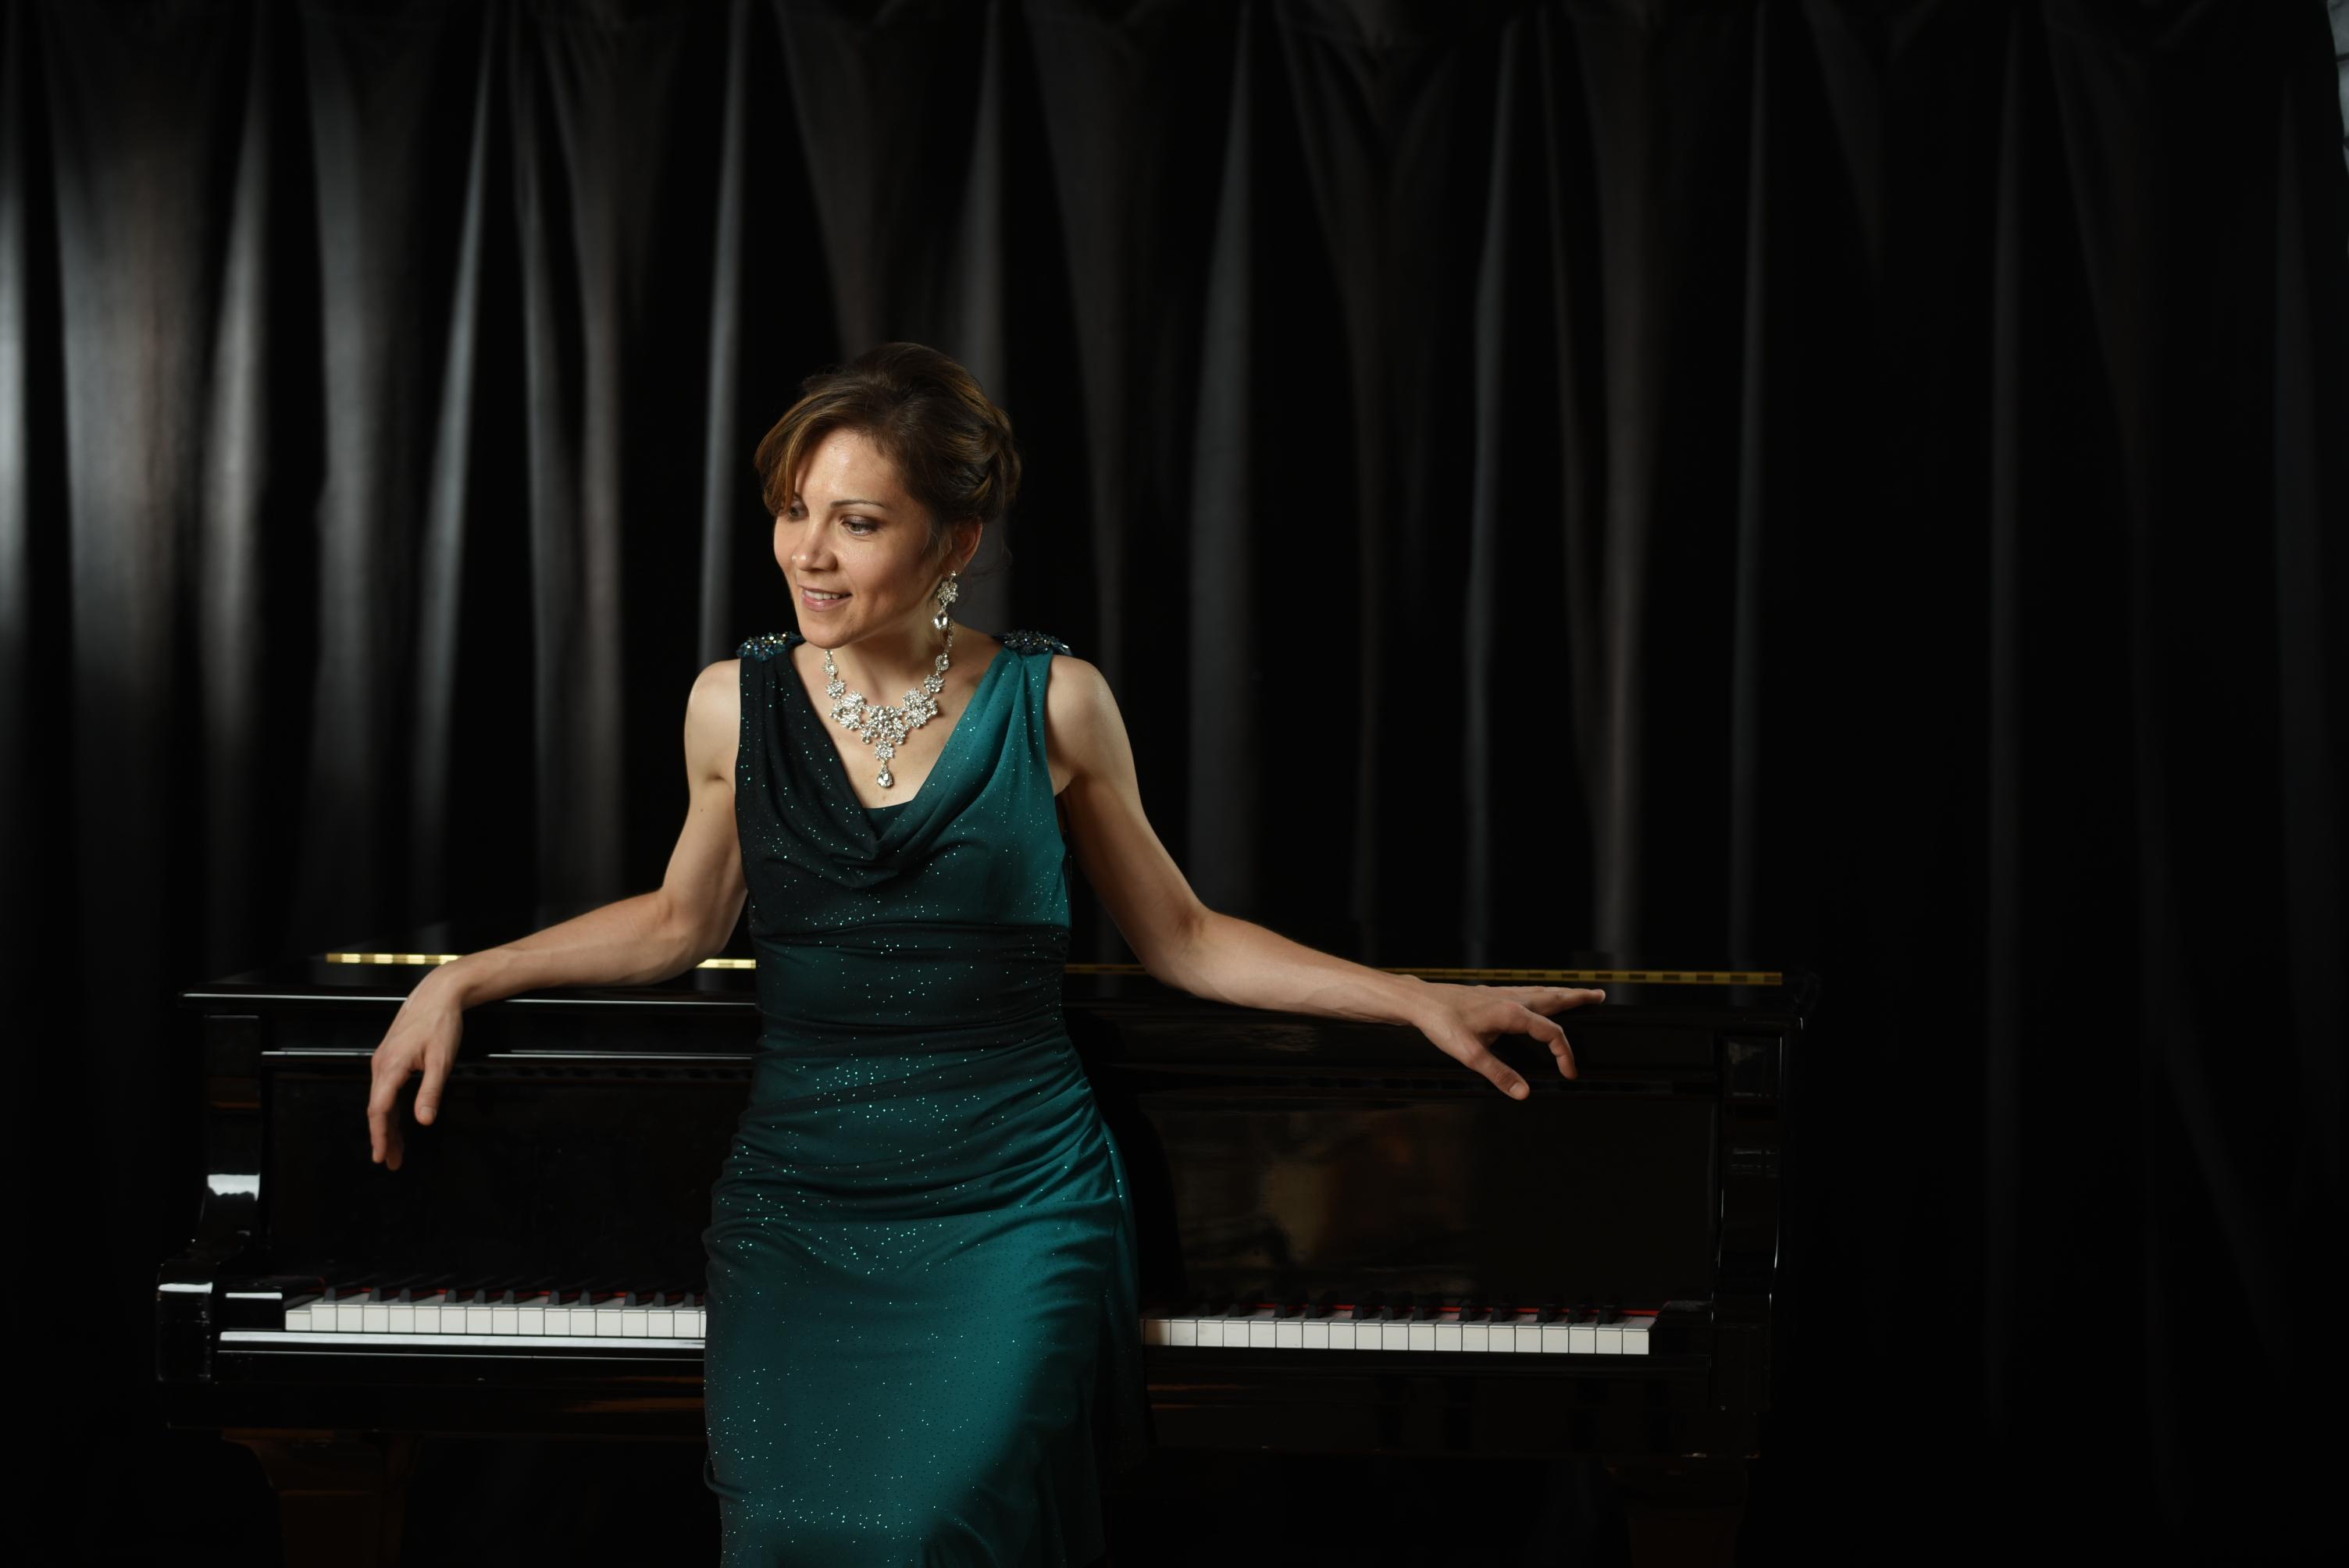 pianist in green dress posing on piano